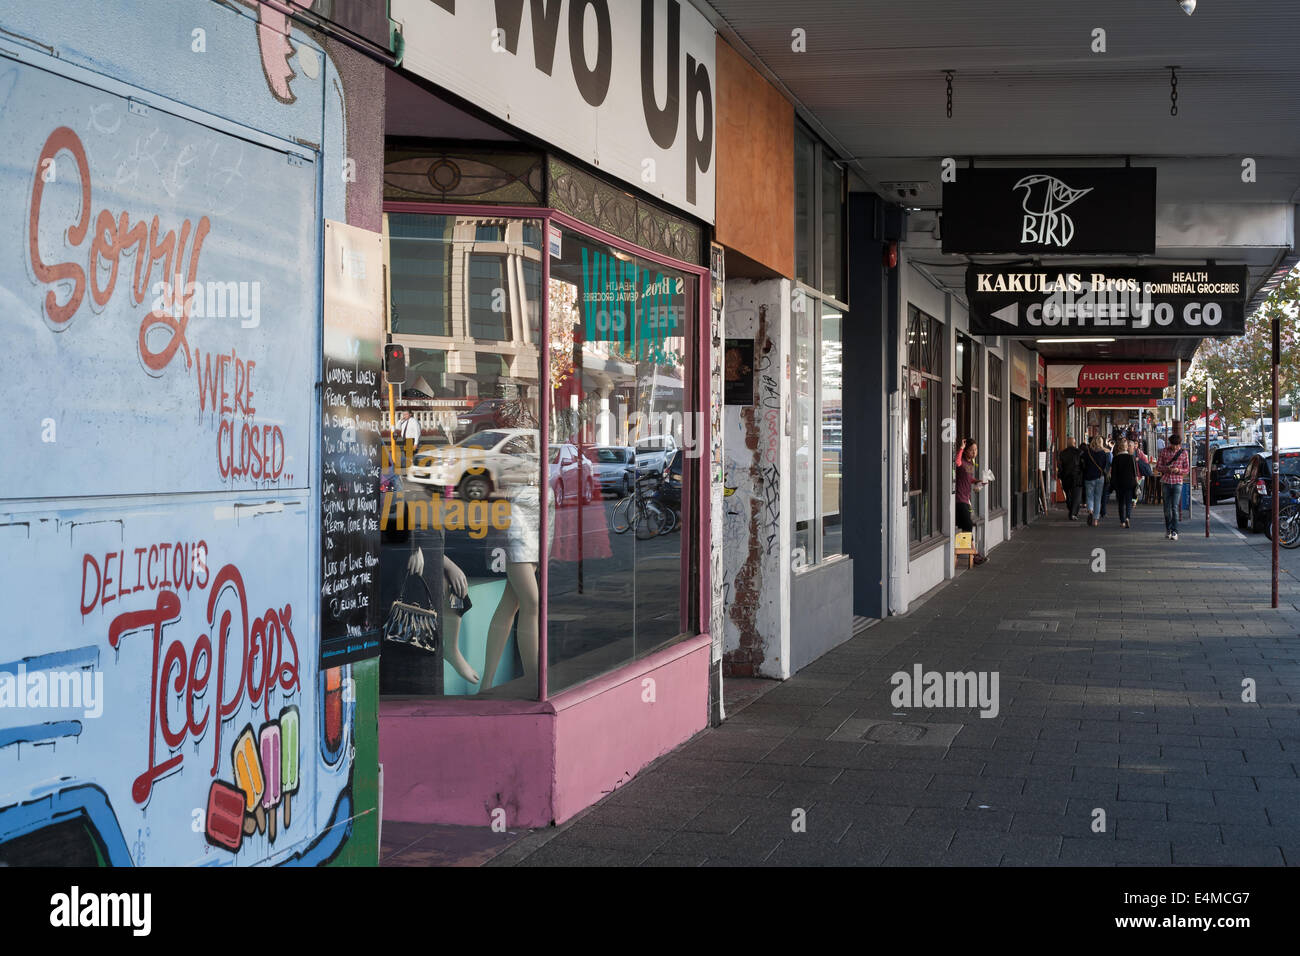 Old shops and sidewalk on William street, in the inner city suburb of Northbridge, Perth. Western Australia. Stock Photo